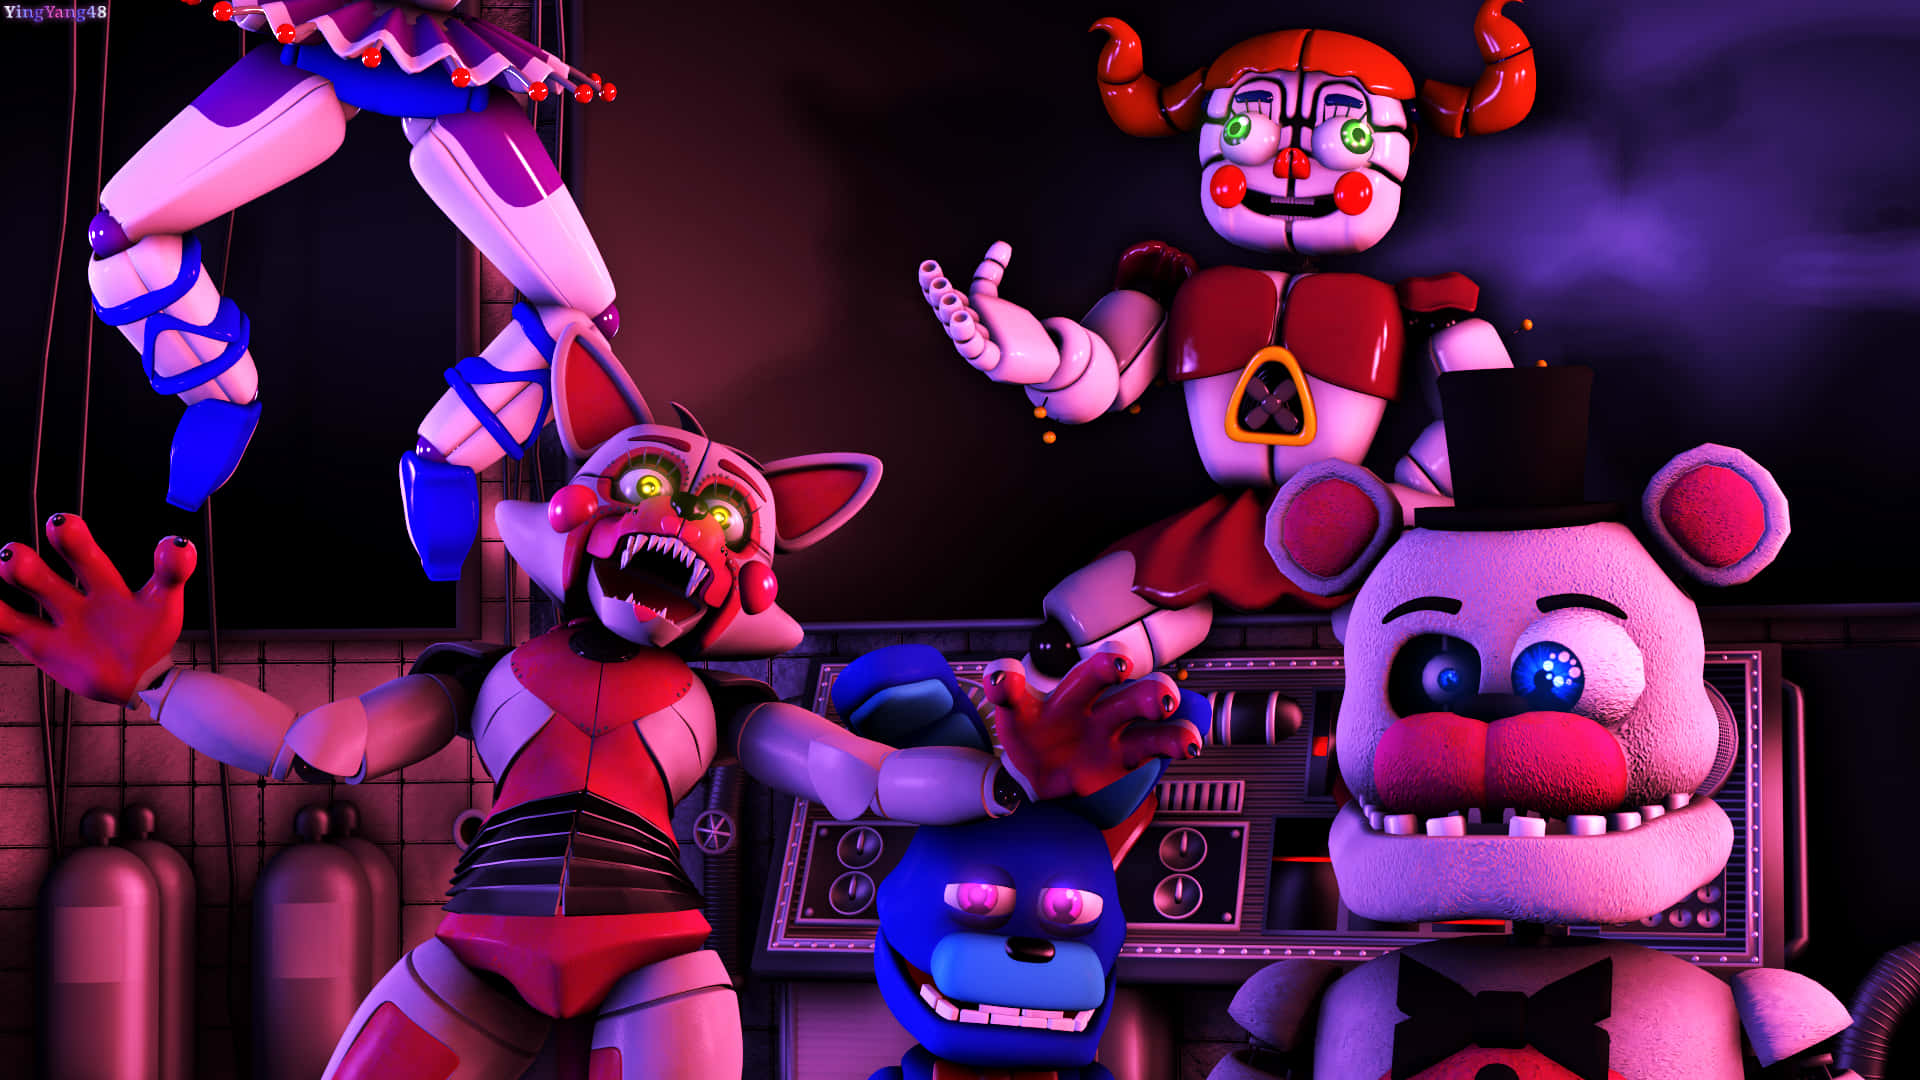 100+] Five Nights At Freddys Sister Location Wallpapers 